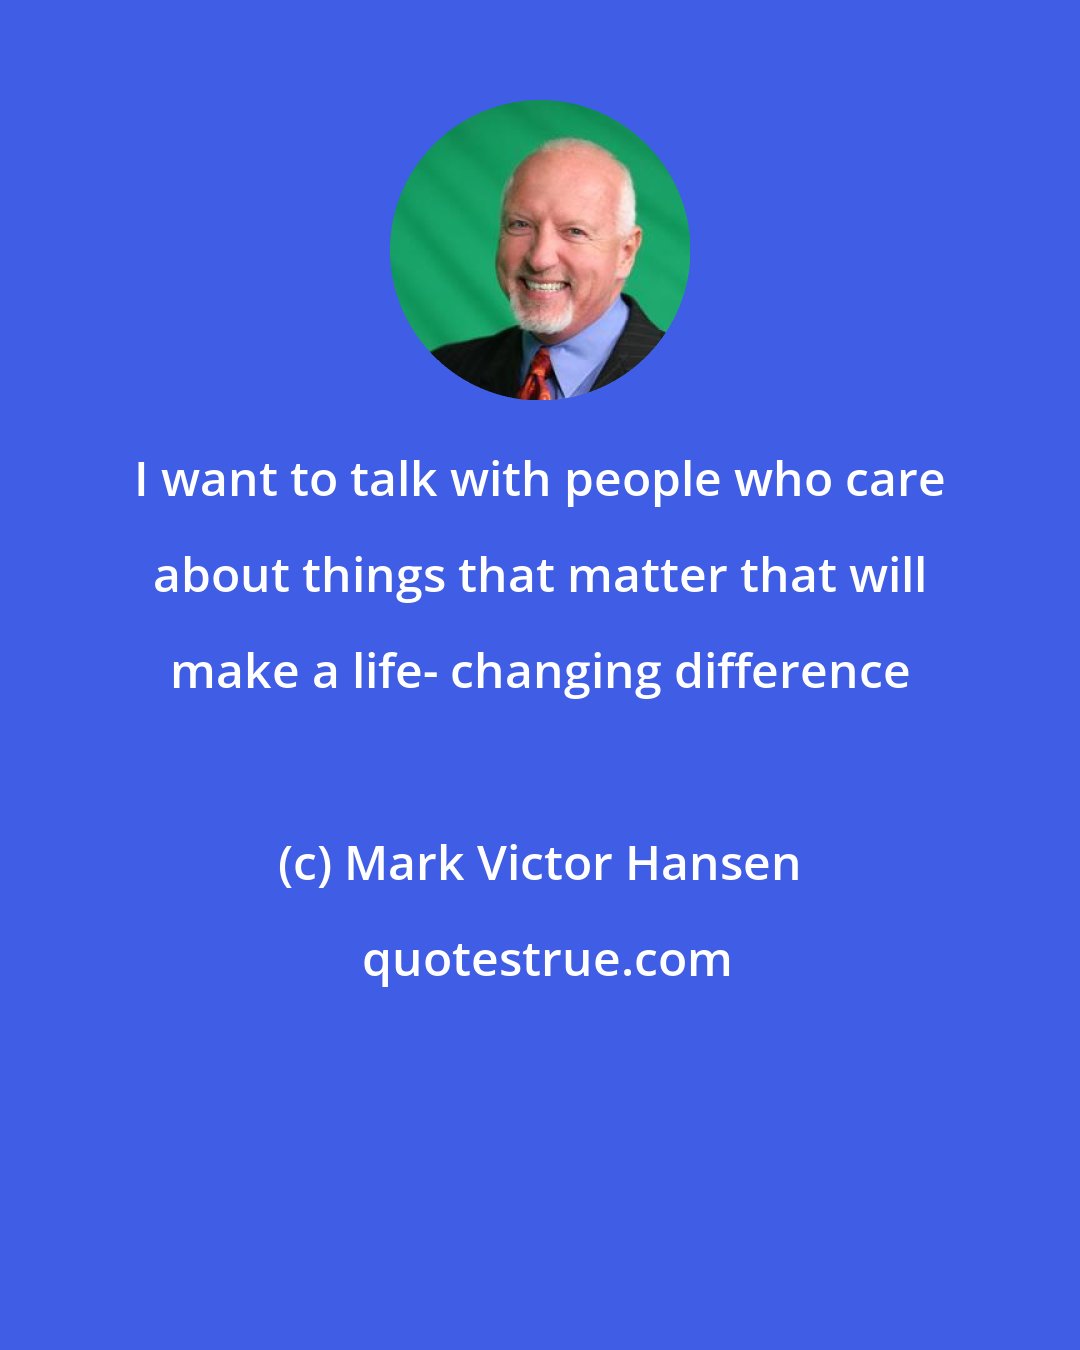 Mark Victor Hansen: I want to talk with people who care about things that matter that will make a life- changing difference